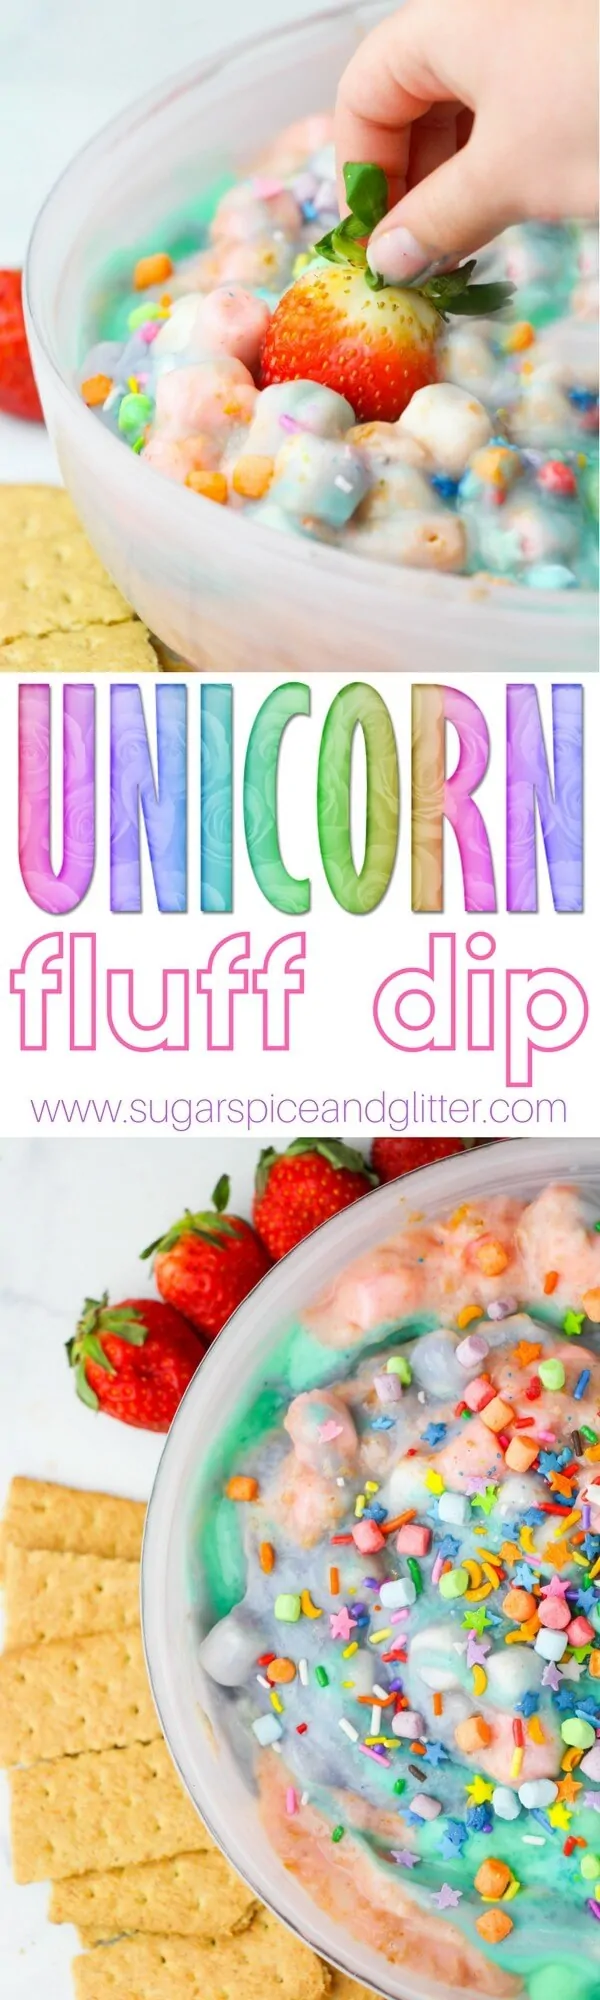 A light and fluffy vanilla-marshmallow fruit dip sprinkled with unicorn magic. Perfect for a unicorn party or playdate, or you can customize the colors and sprinkles to any other party theme!